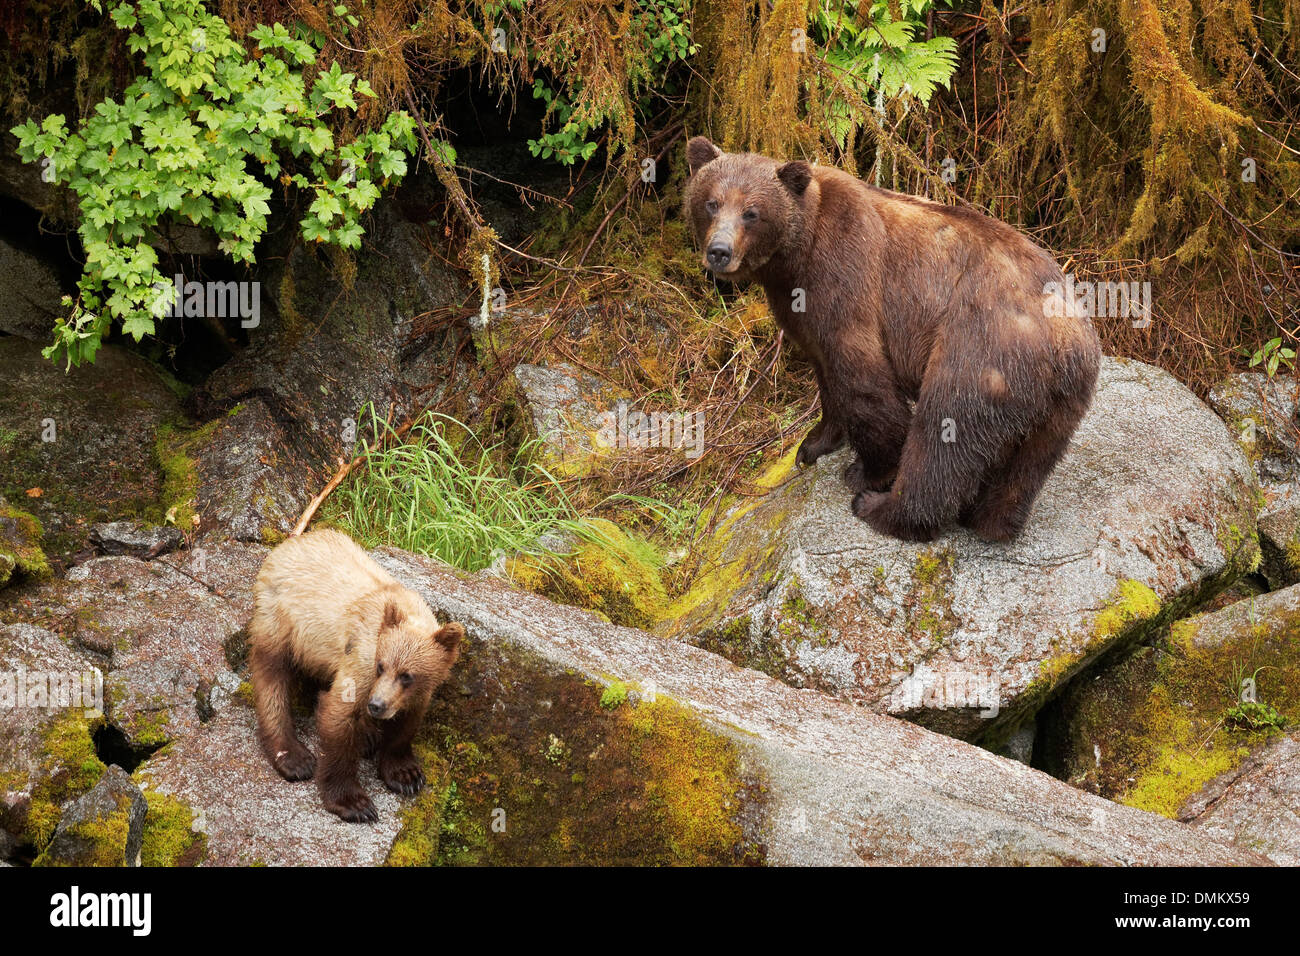 Female coastal brown bear and her cub walking on boulders, Anan Wildlife Observatory, Tongass National Forest, Southeast, Alaska Stock Photo